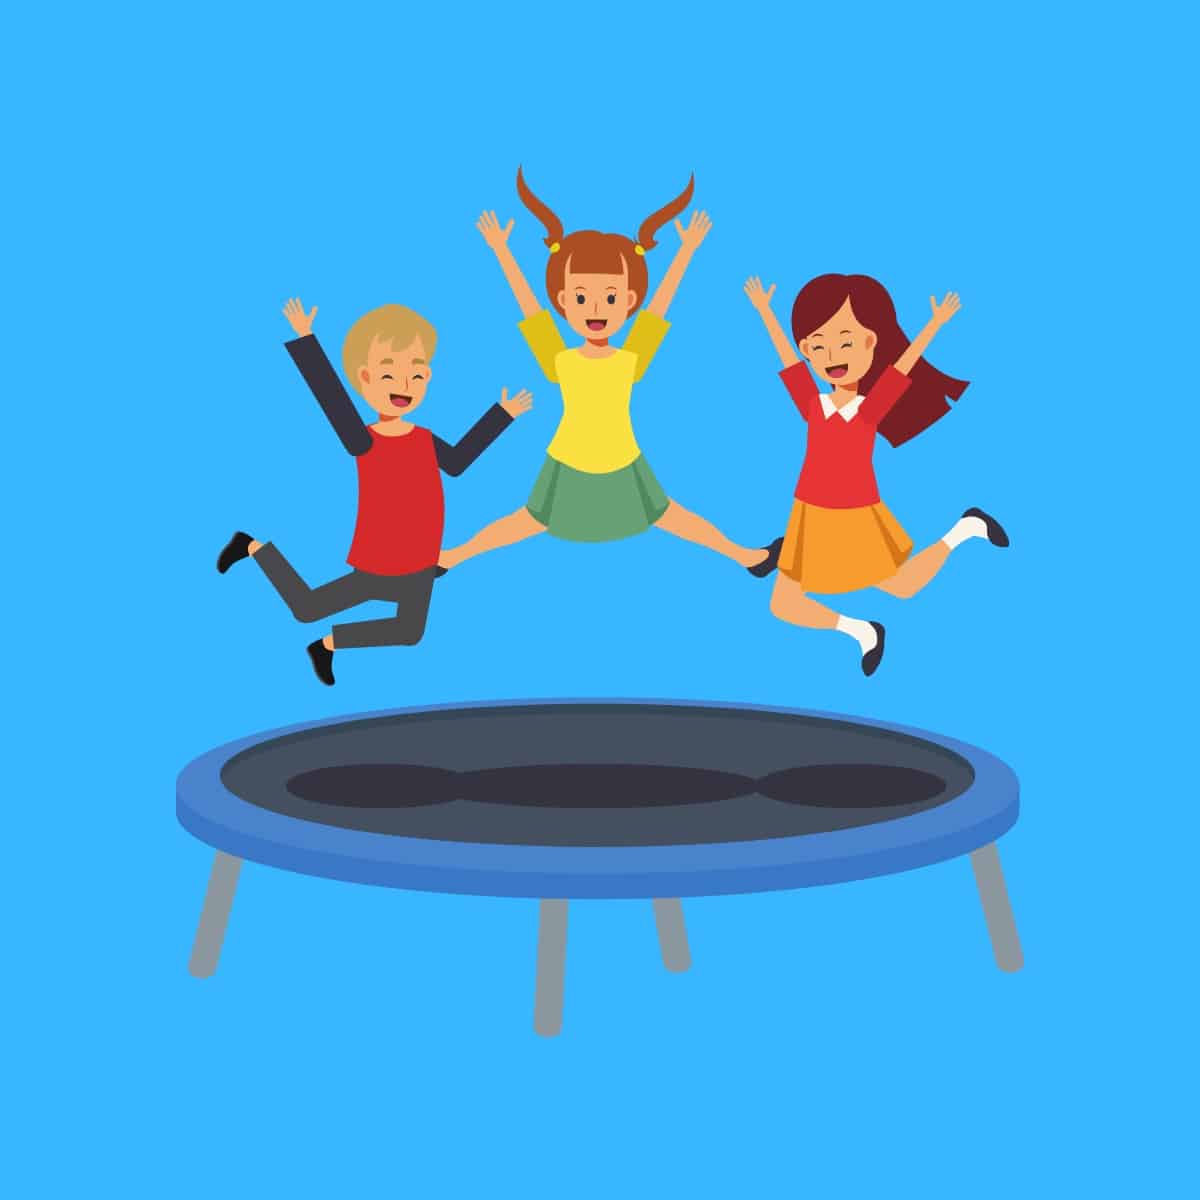 Cartoon graphic of a three kids smiling and jumping on a trampoline on a blue background.